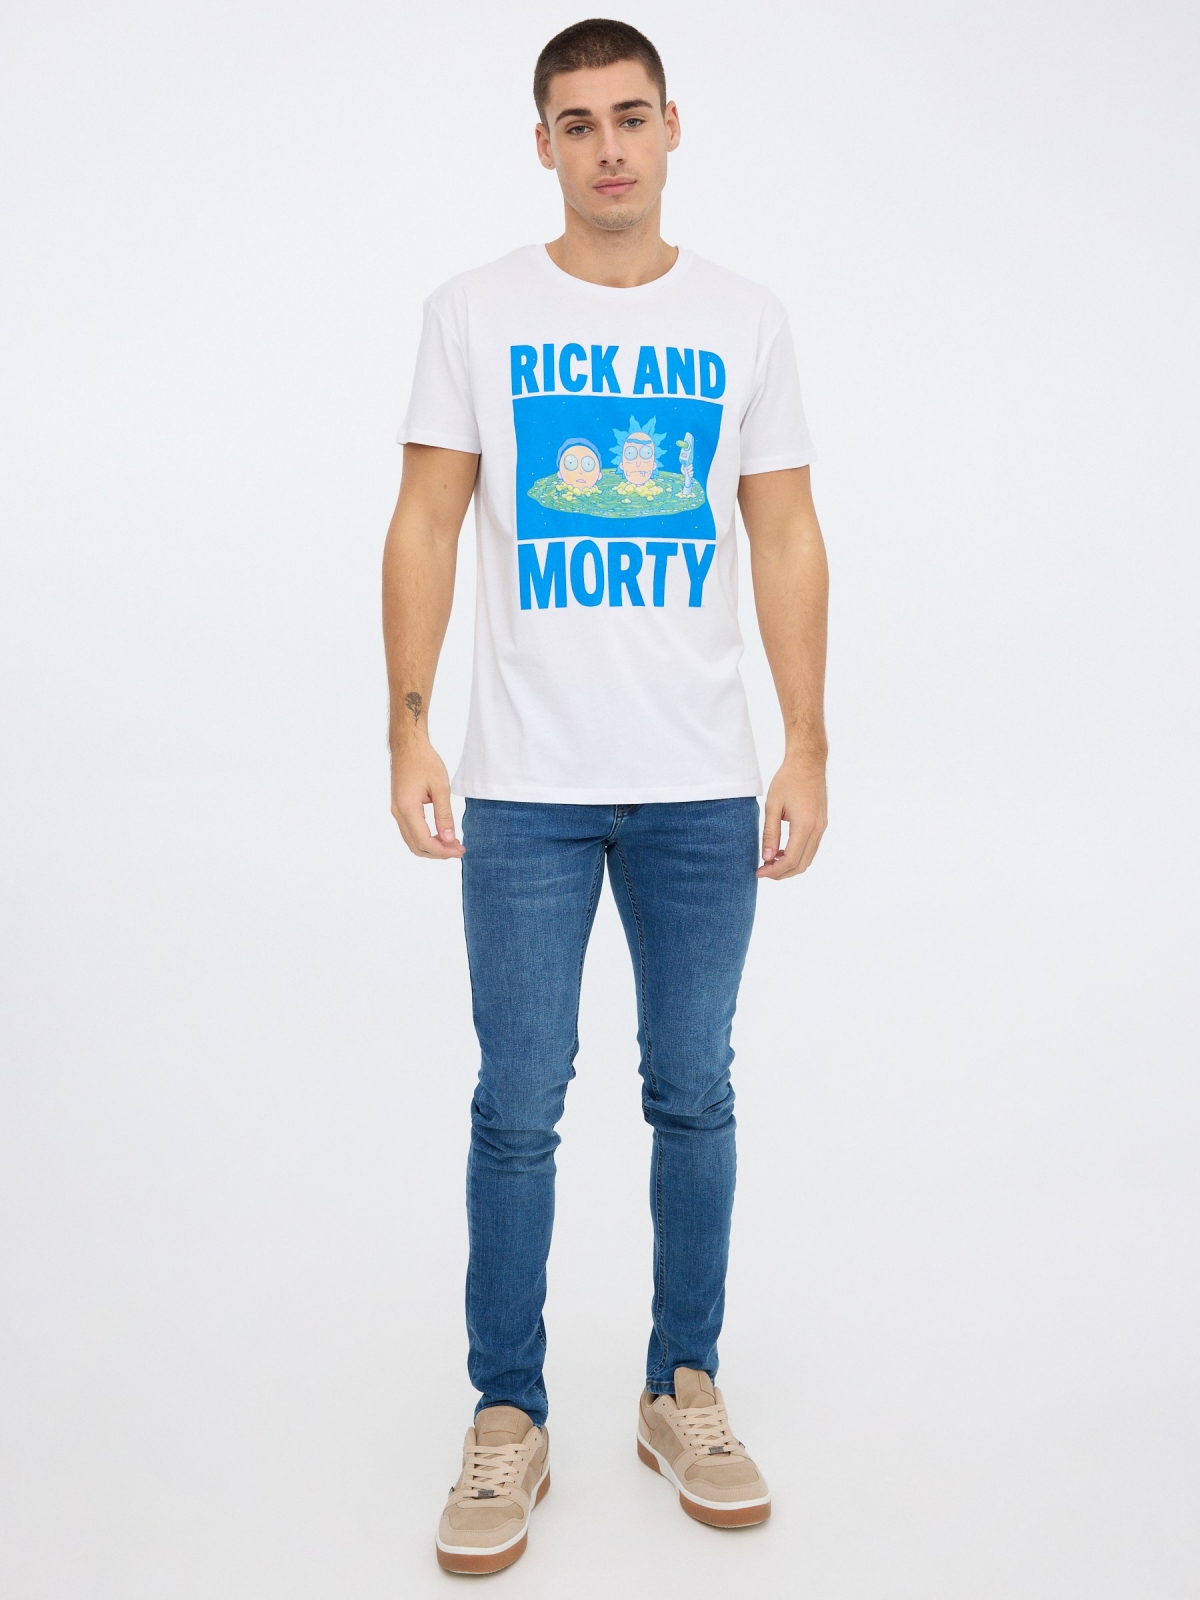 Rick & Morty T-shirt white front view